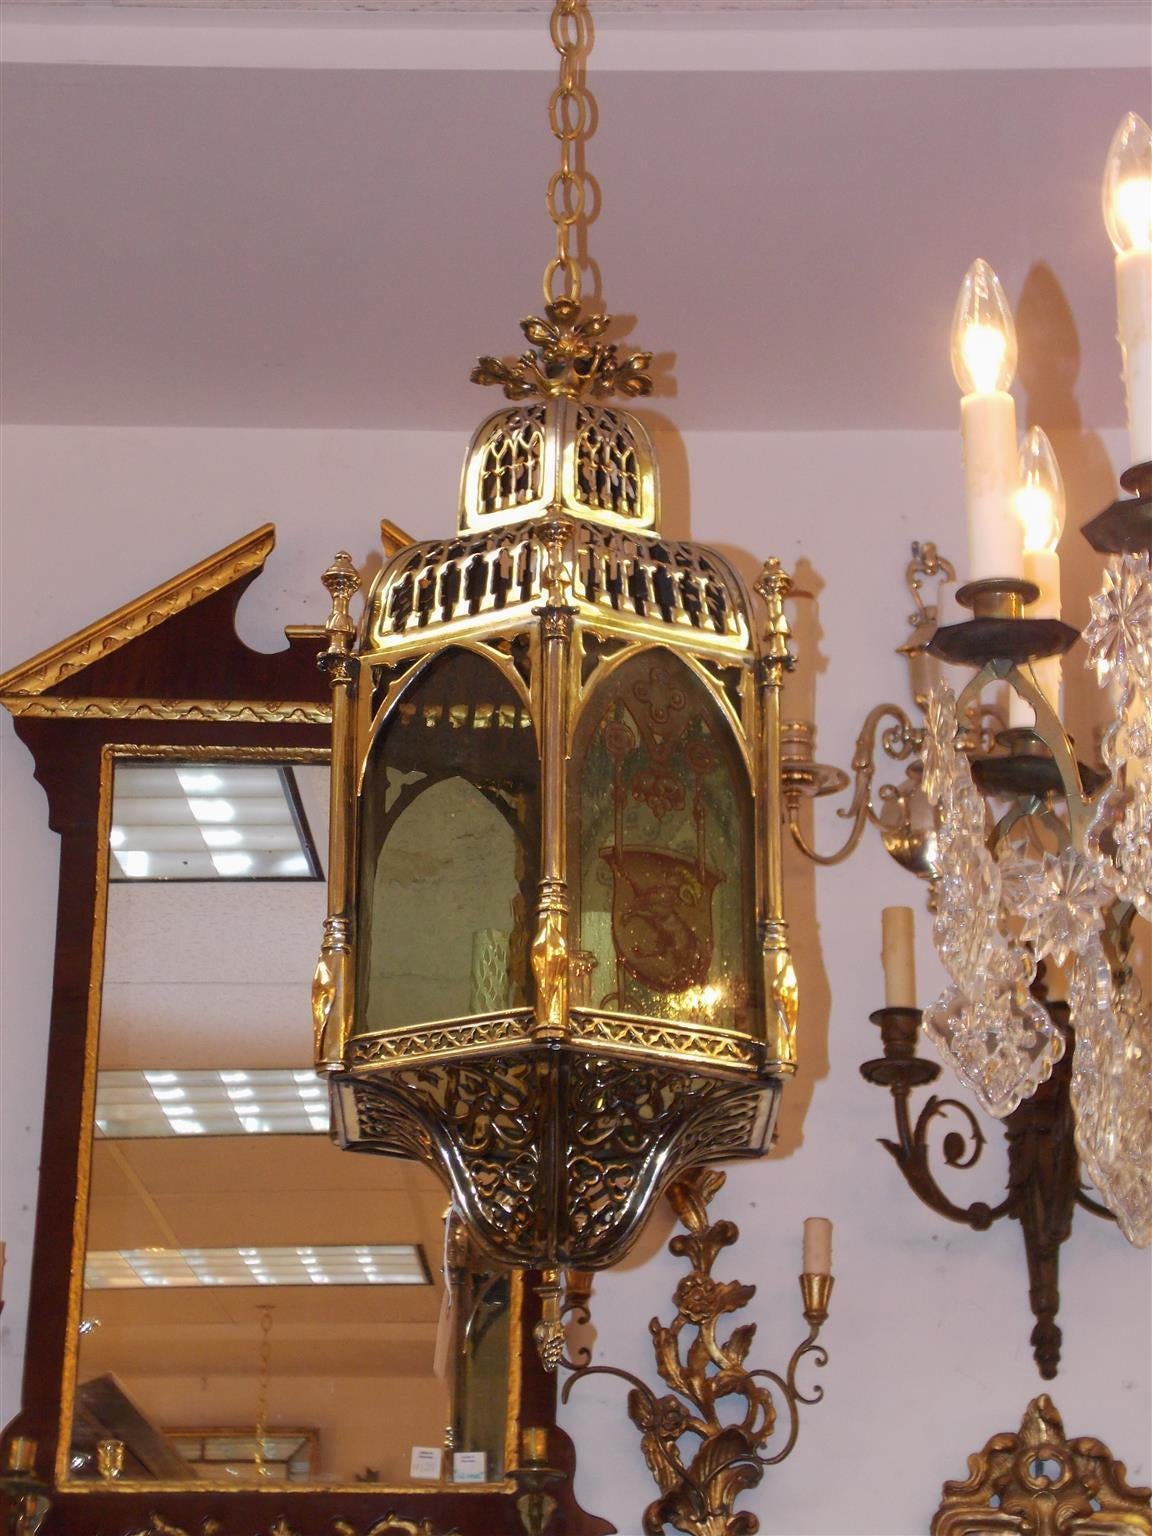 English brass royalty hexagon shaped hanging hall lantern with pierced decorative dome, corner finials, original alternating glass panels with coats of arms, four-light electrified cluster and terminating on a lower decorative pierced concave dome